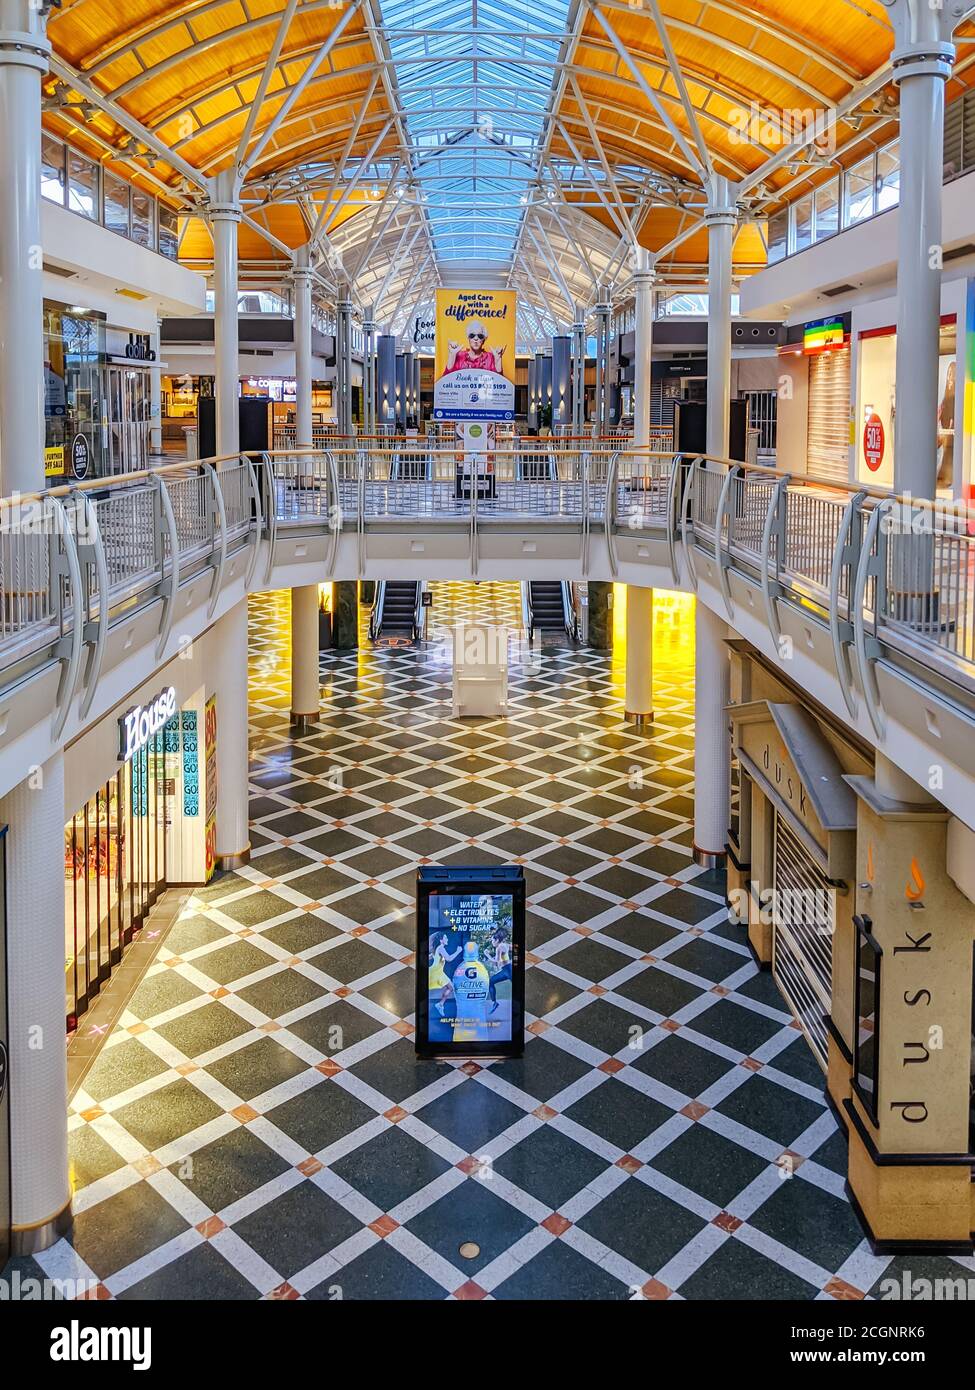 Melbourne Shopping Centre During Coronavirus Pandemic and Stage 4 Lockdown Stock Photo